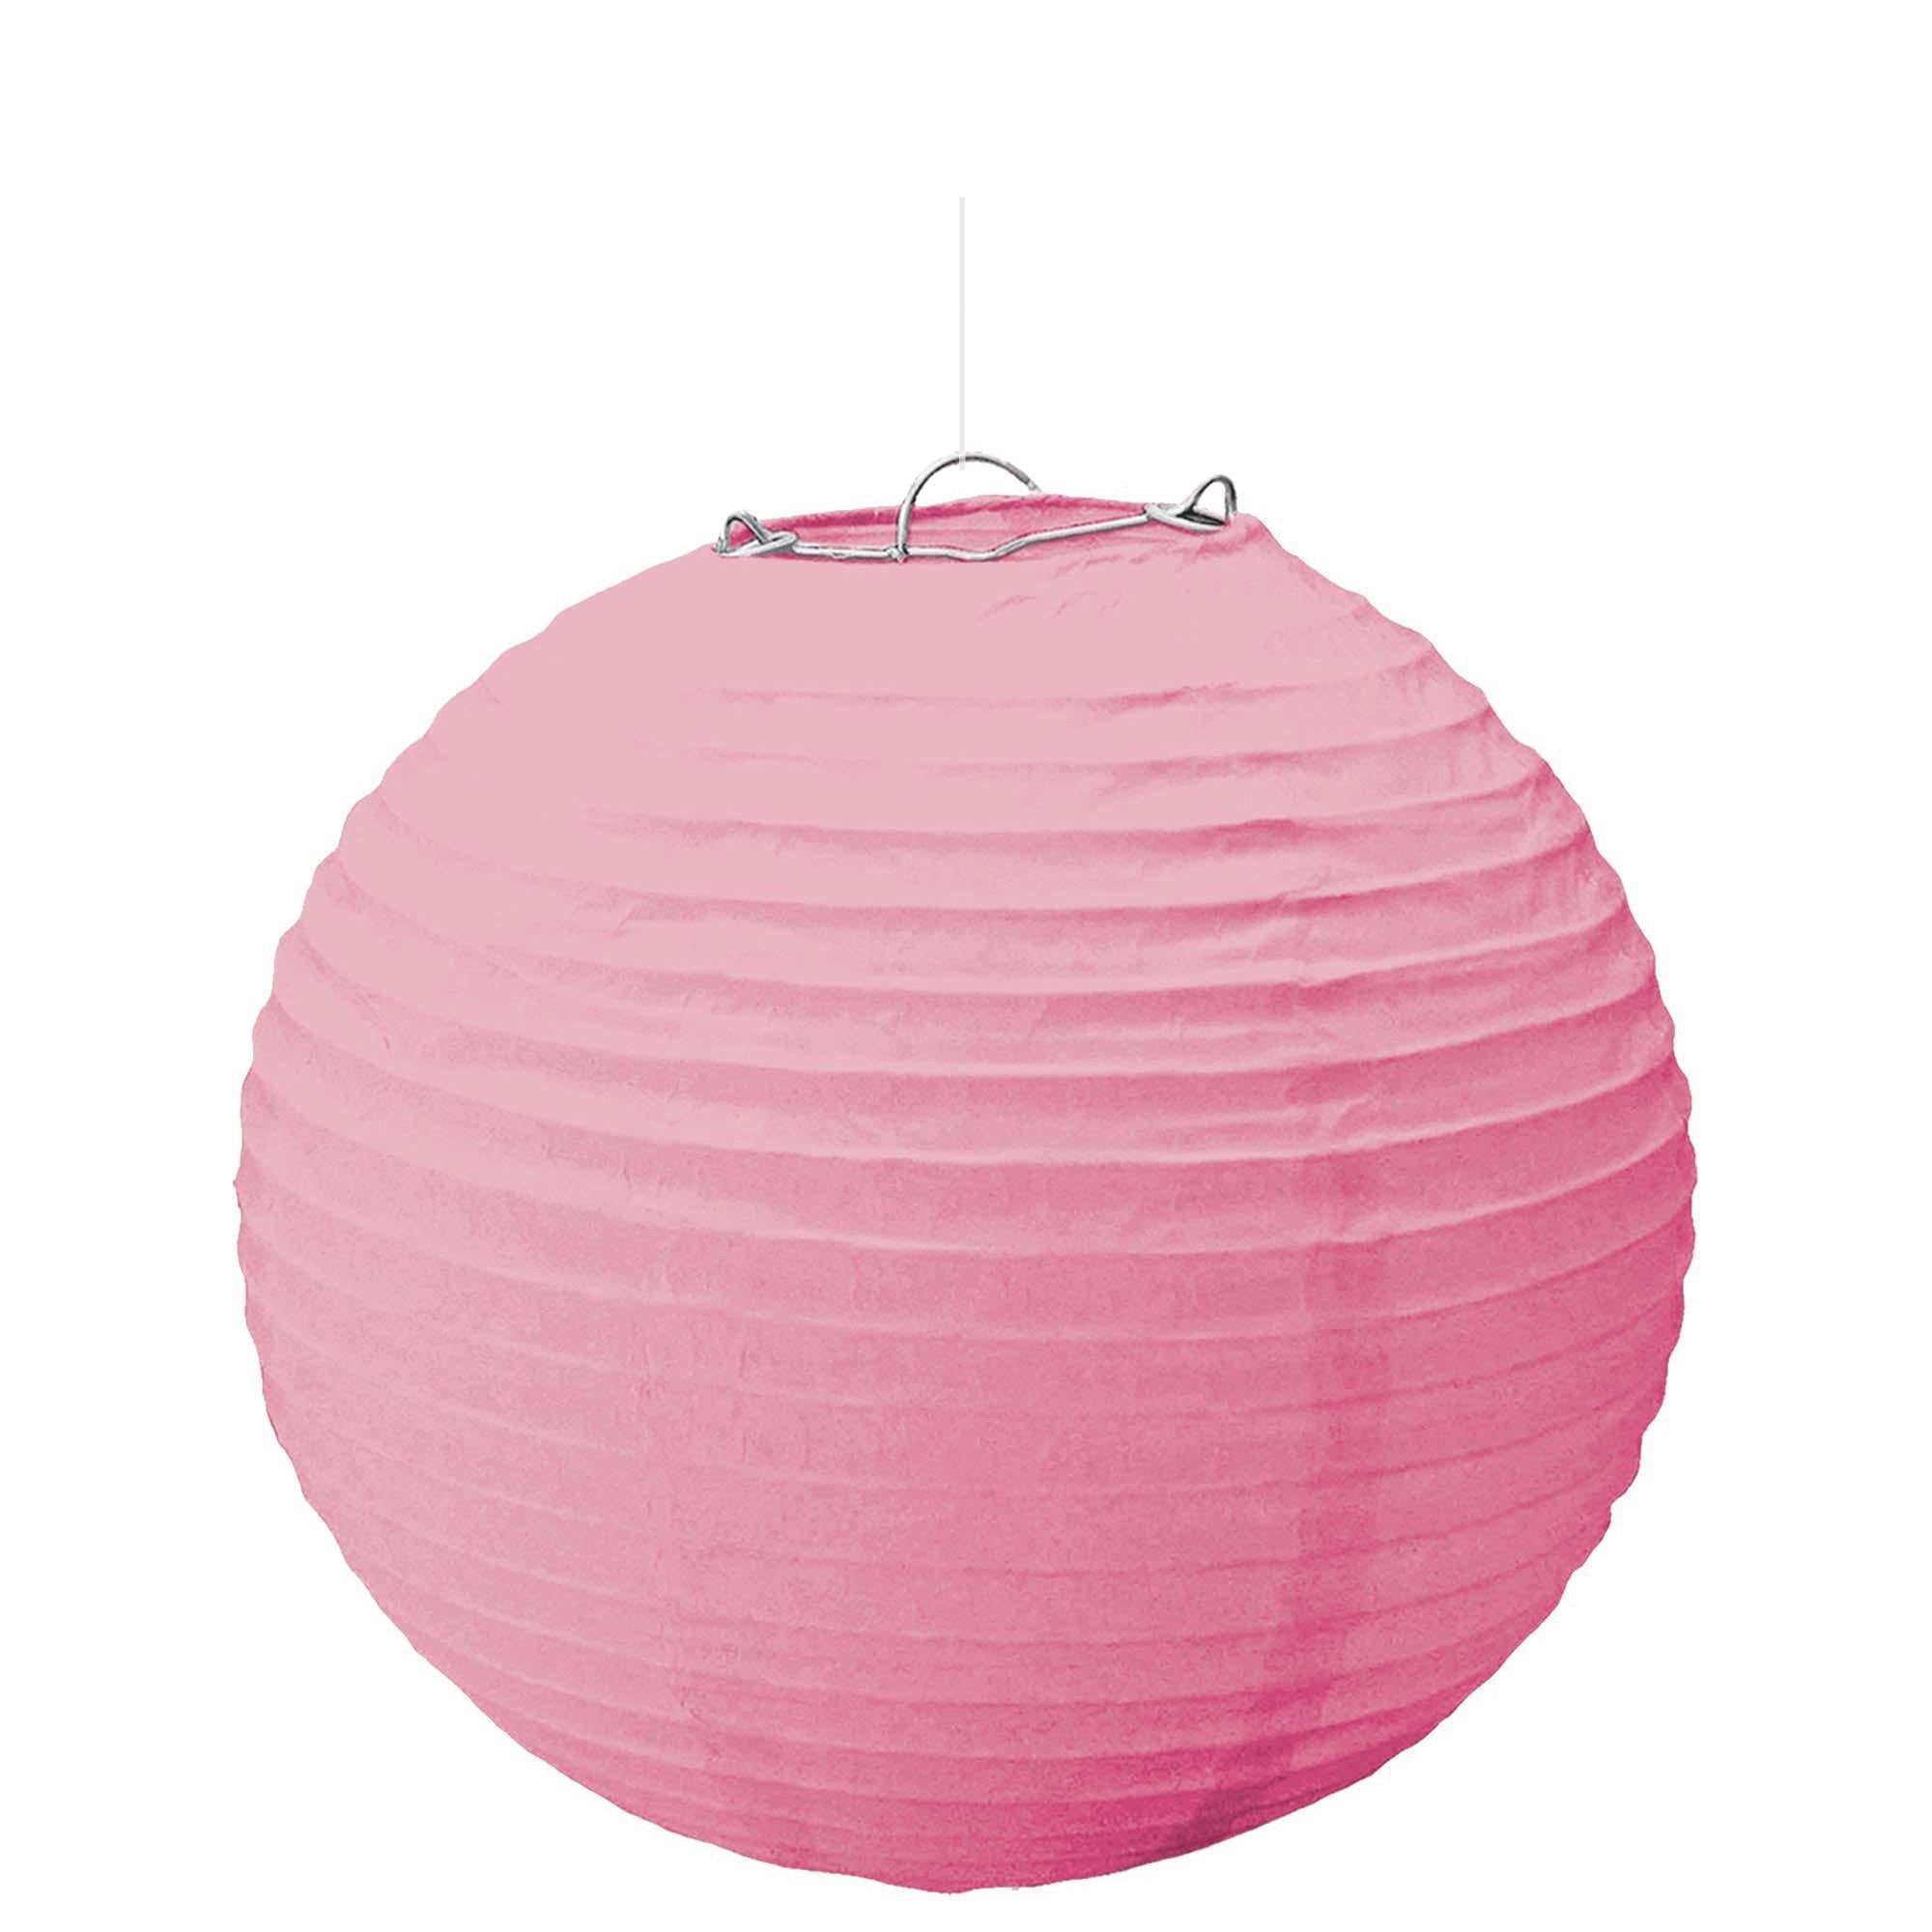 New Pink Round Paper Lantern 9.5in 3pcs Decorations - Party Centre